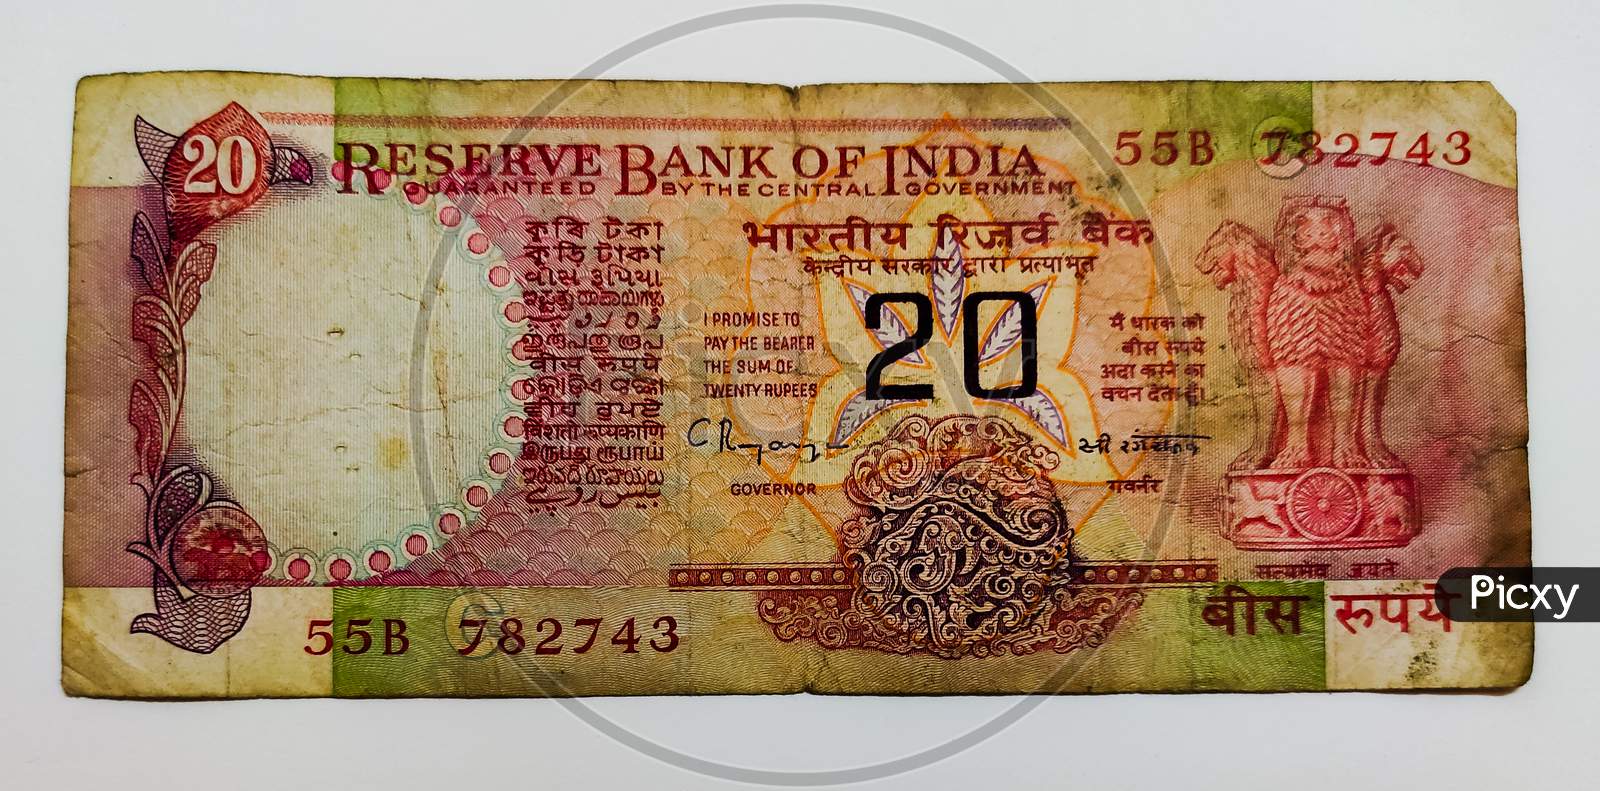 Old currency notes of 20₹ rupees of  India.